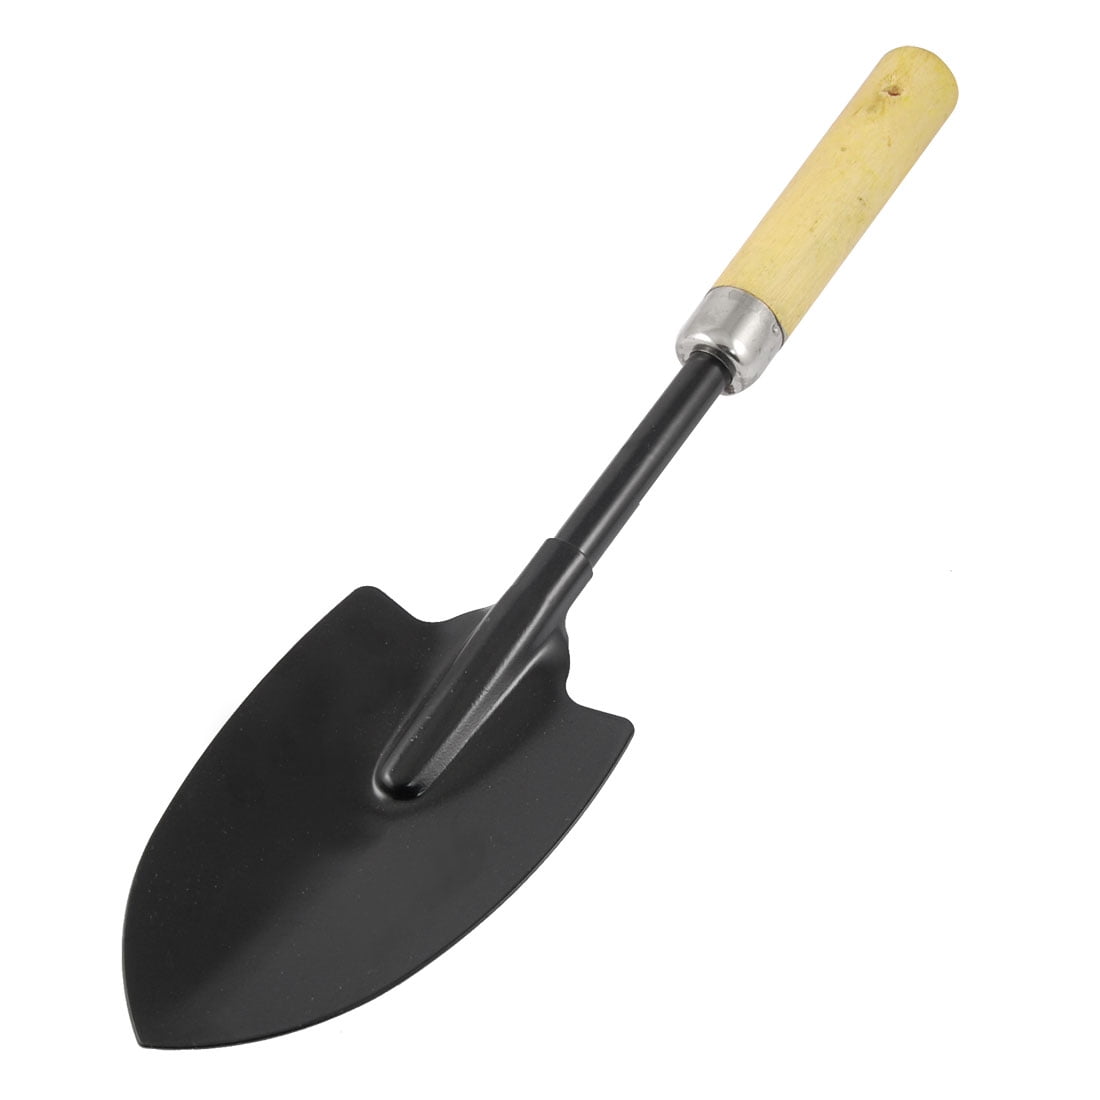 Details about   Garden Tool Set,Stainless Steel Hand Shovel with Wood Handle,Potting Trowel, 